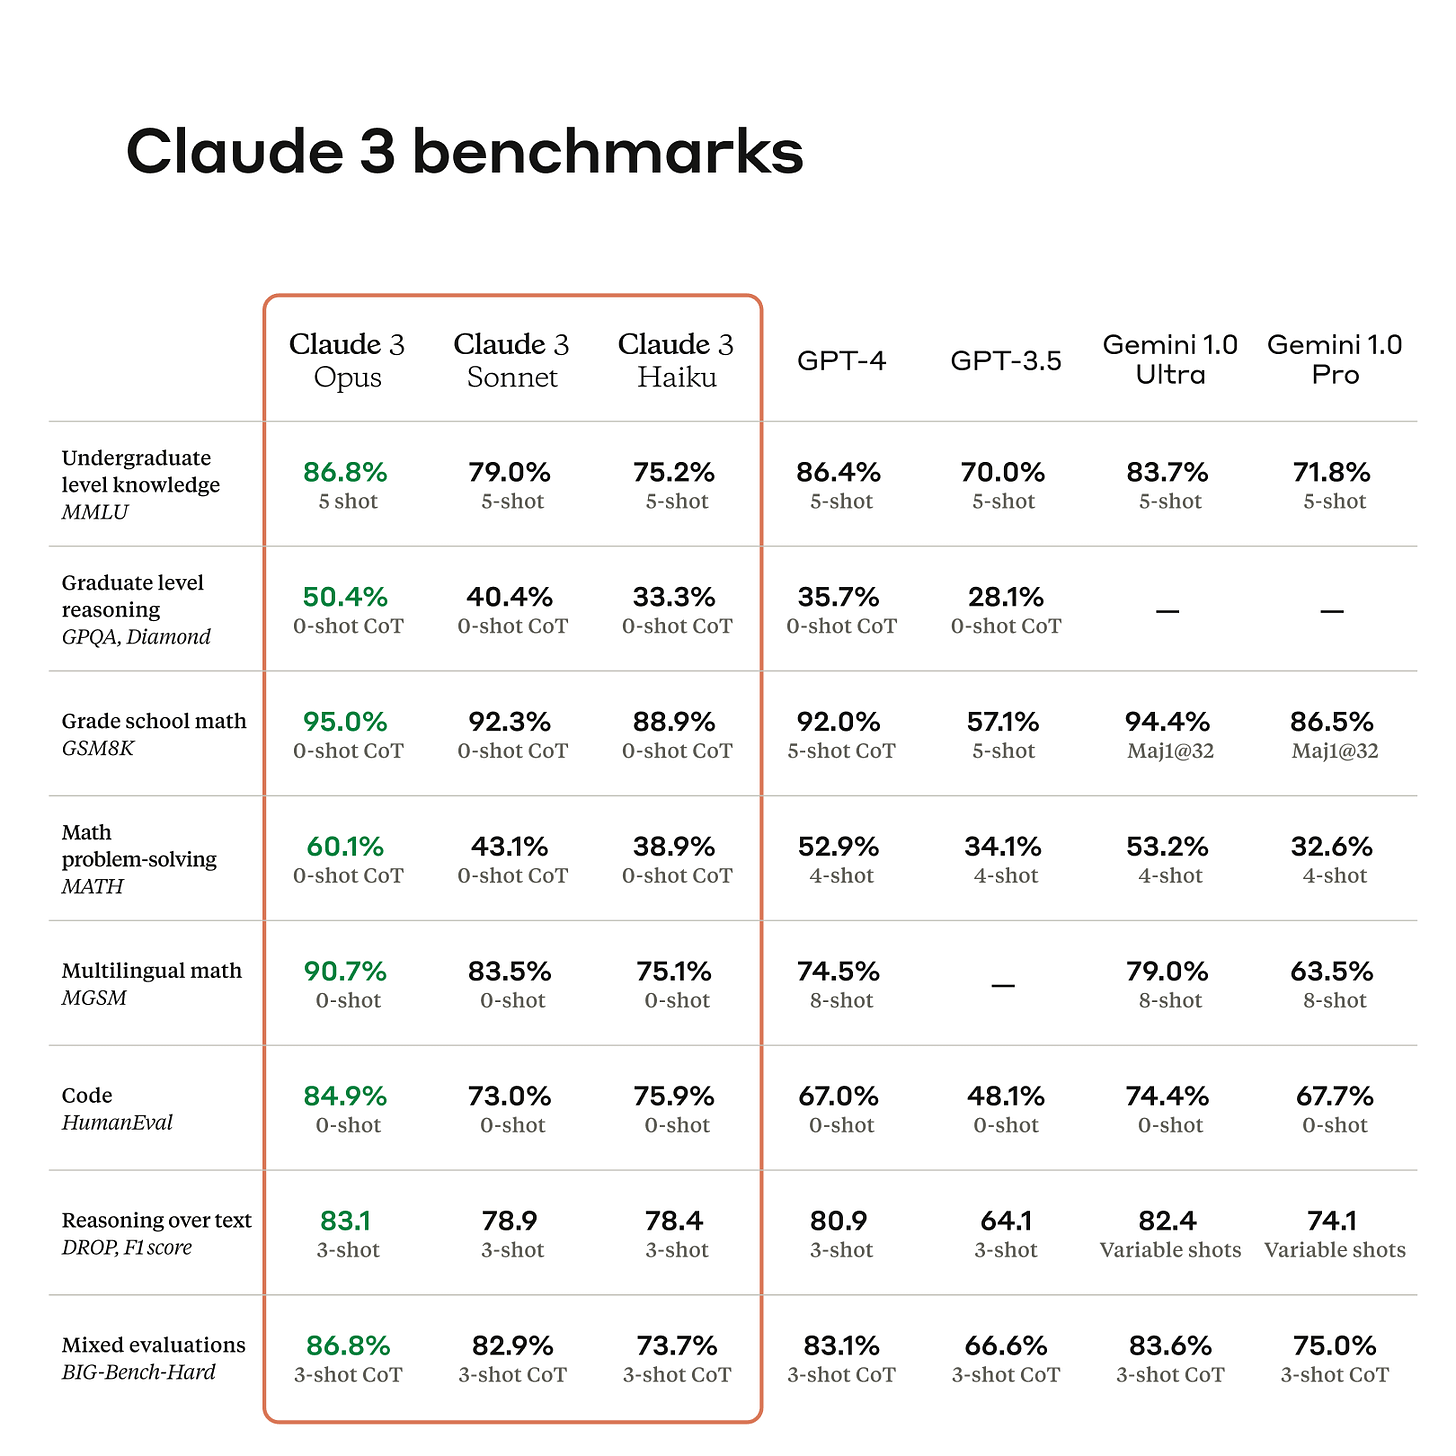 A table of Claude 3 model family benchmarks. Claude 3 Opus, the most capable model, exceeds SOTA across reasoning, math, code, and other evaluations versus GPT-4 and Gemini Ultra.